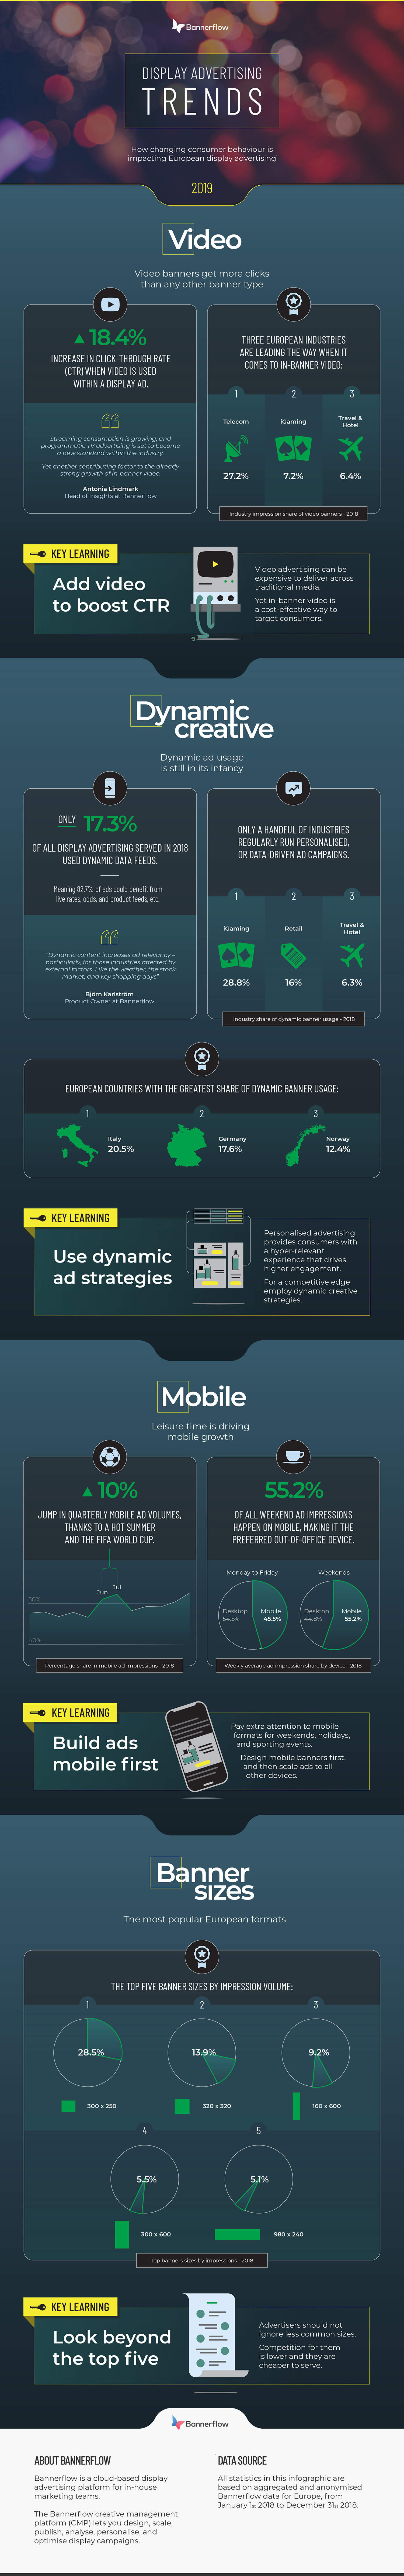 Display-Advertising-Trends-2019-Bannerflow-infographic-1